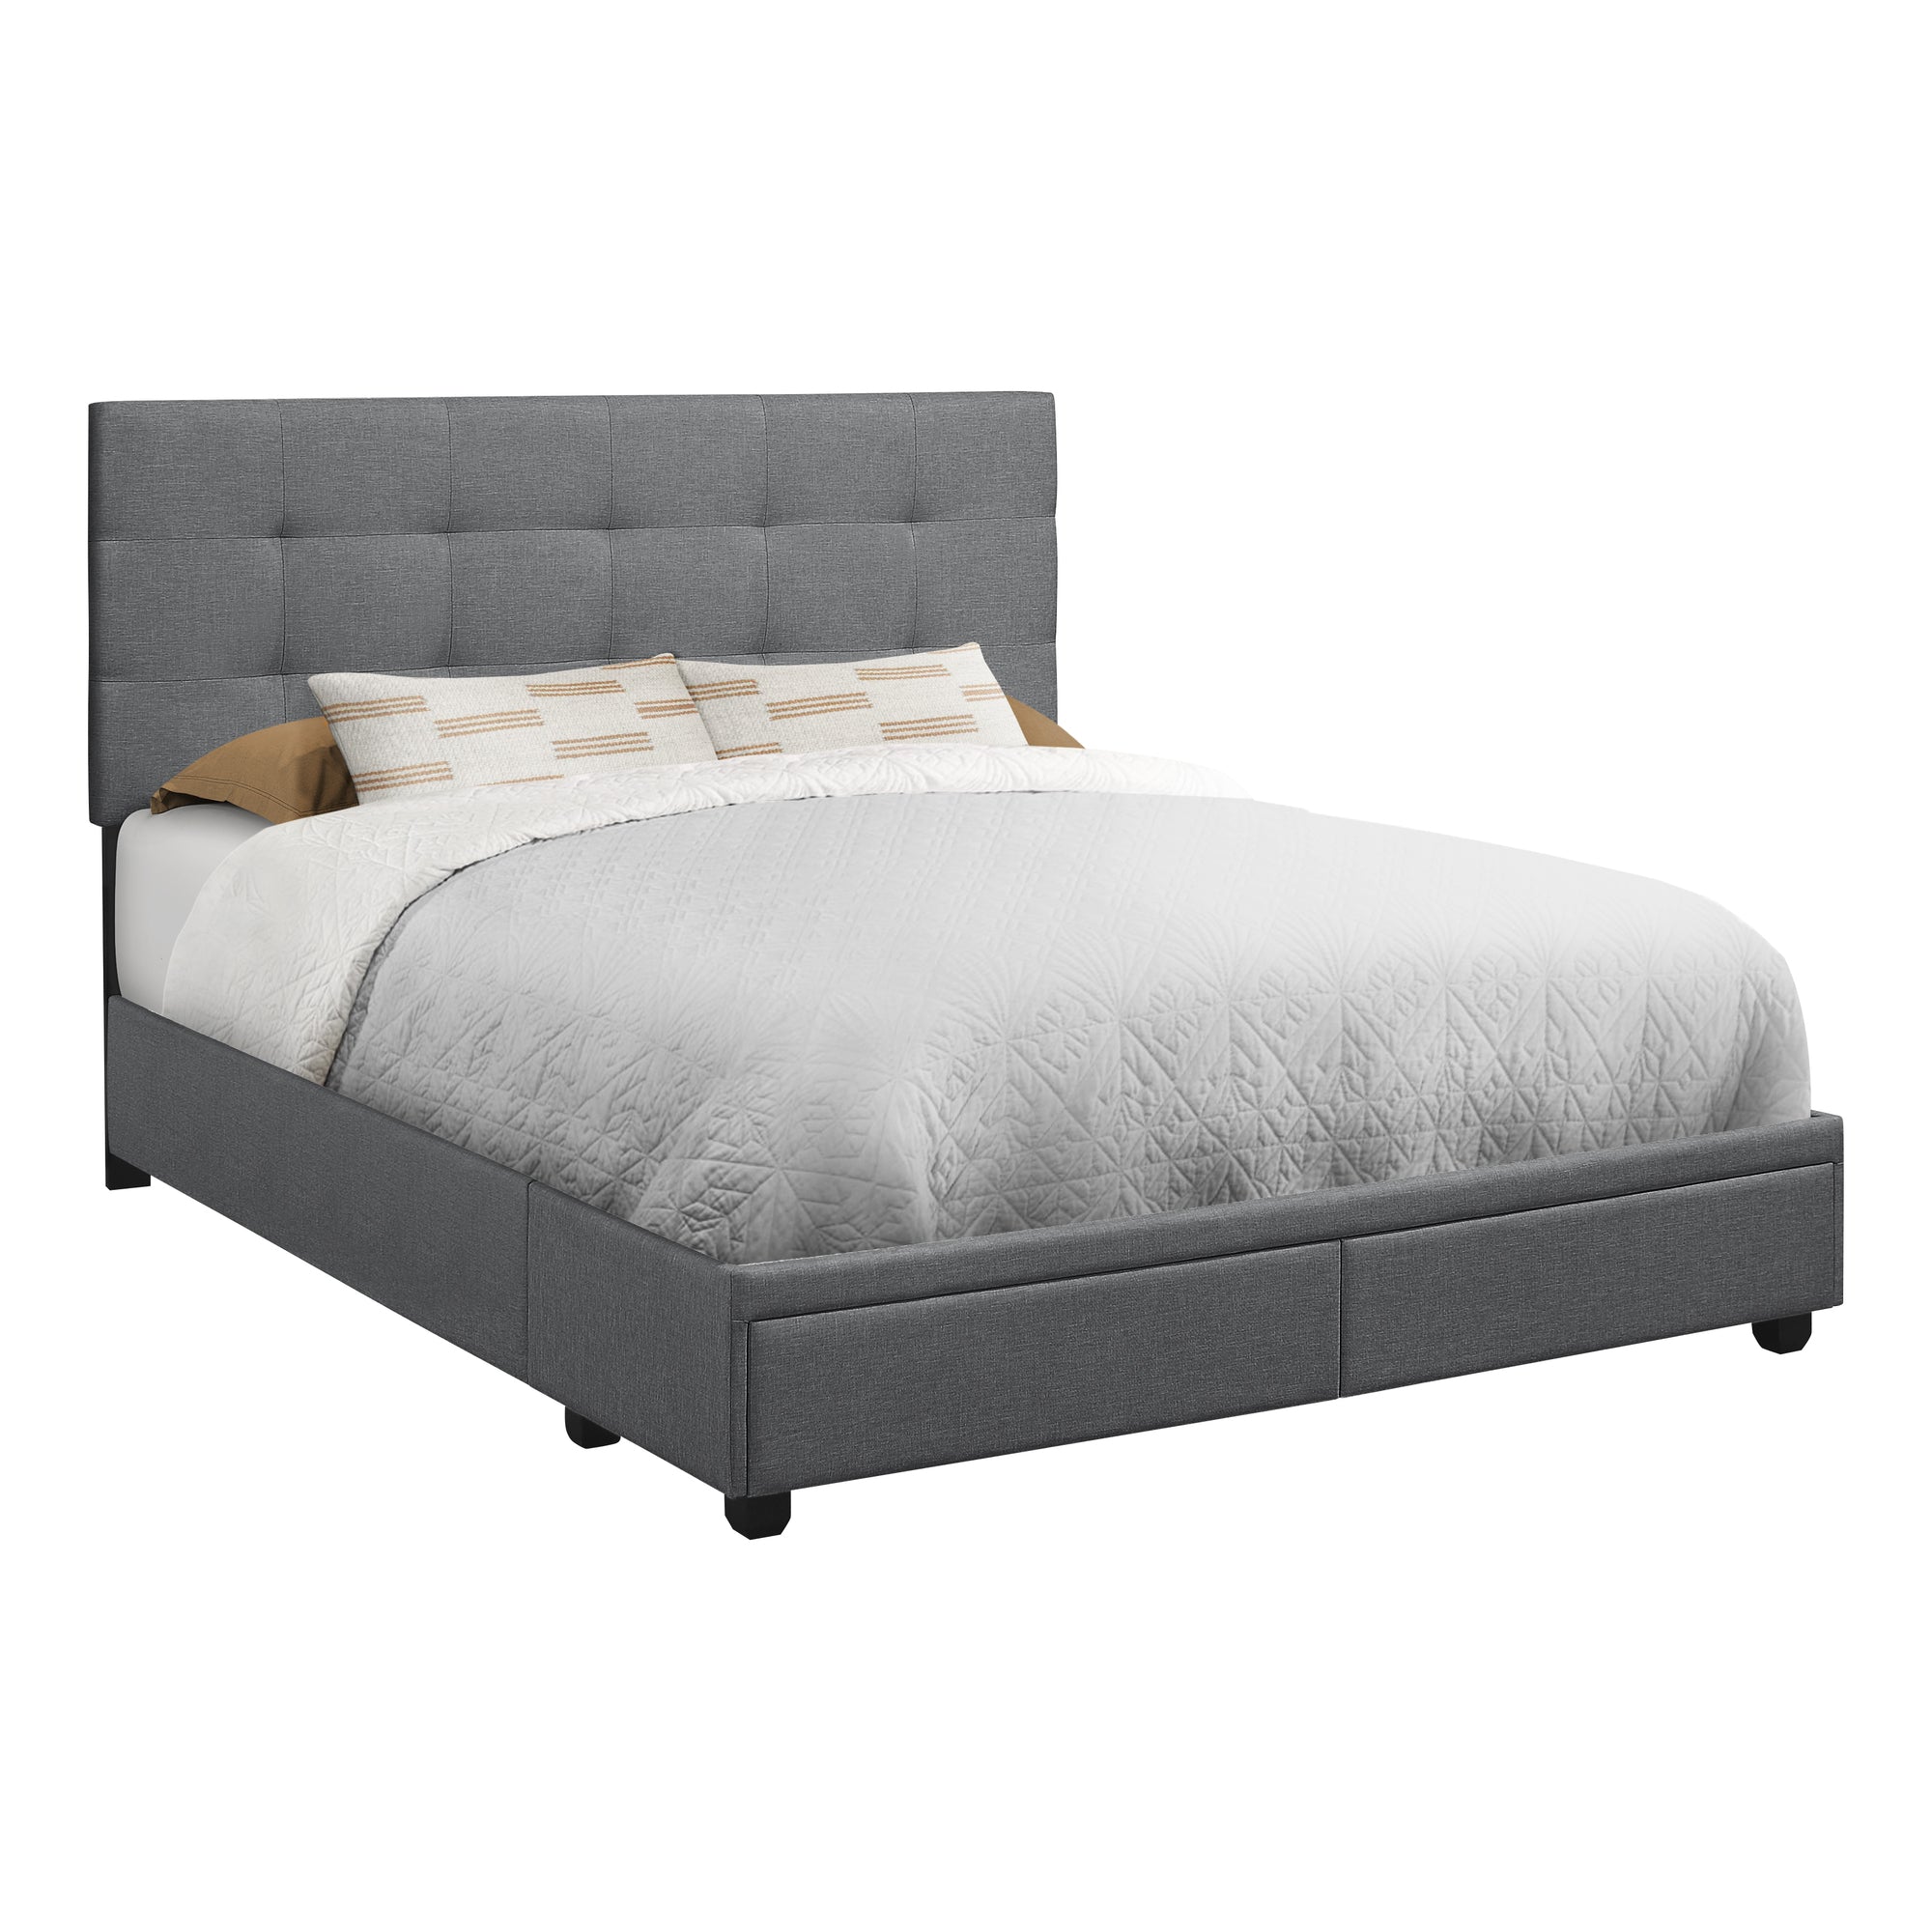 BED - QUEEN SIZE / GREY LINEN WITH 2 STORAGE DRAWERS